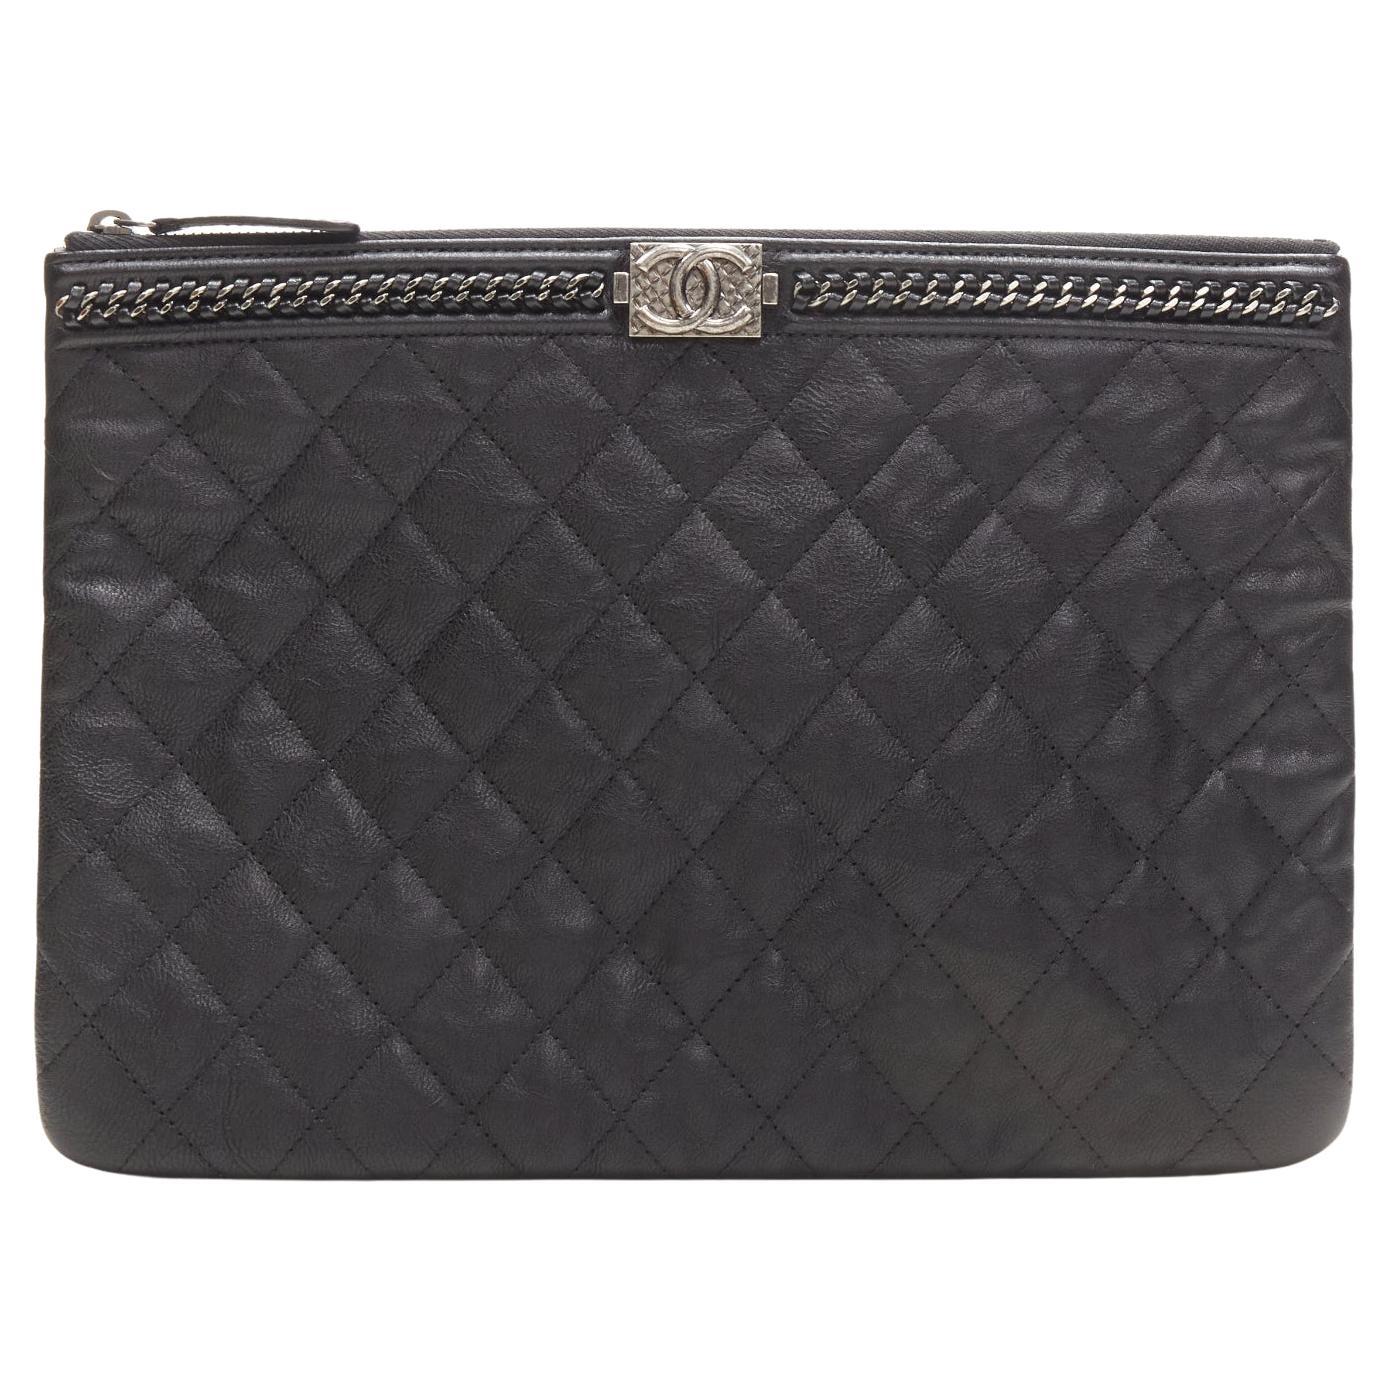 CHANEL Large Boy O Case black quilted leather chain trim flat pouch clutch bag For Sale